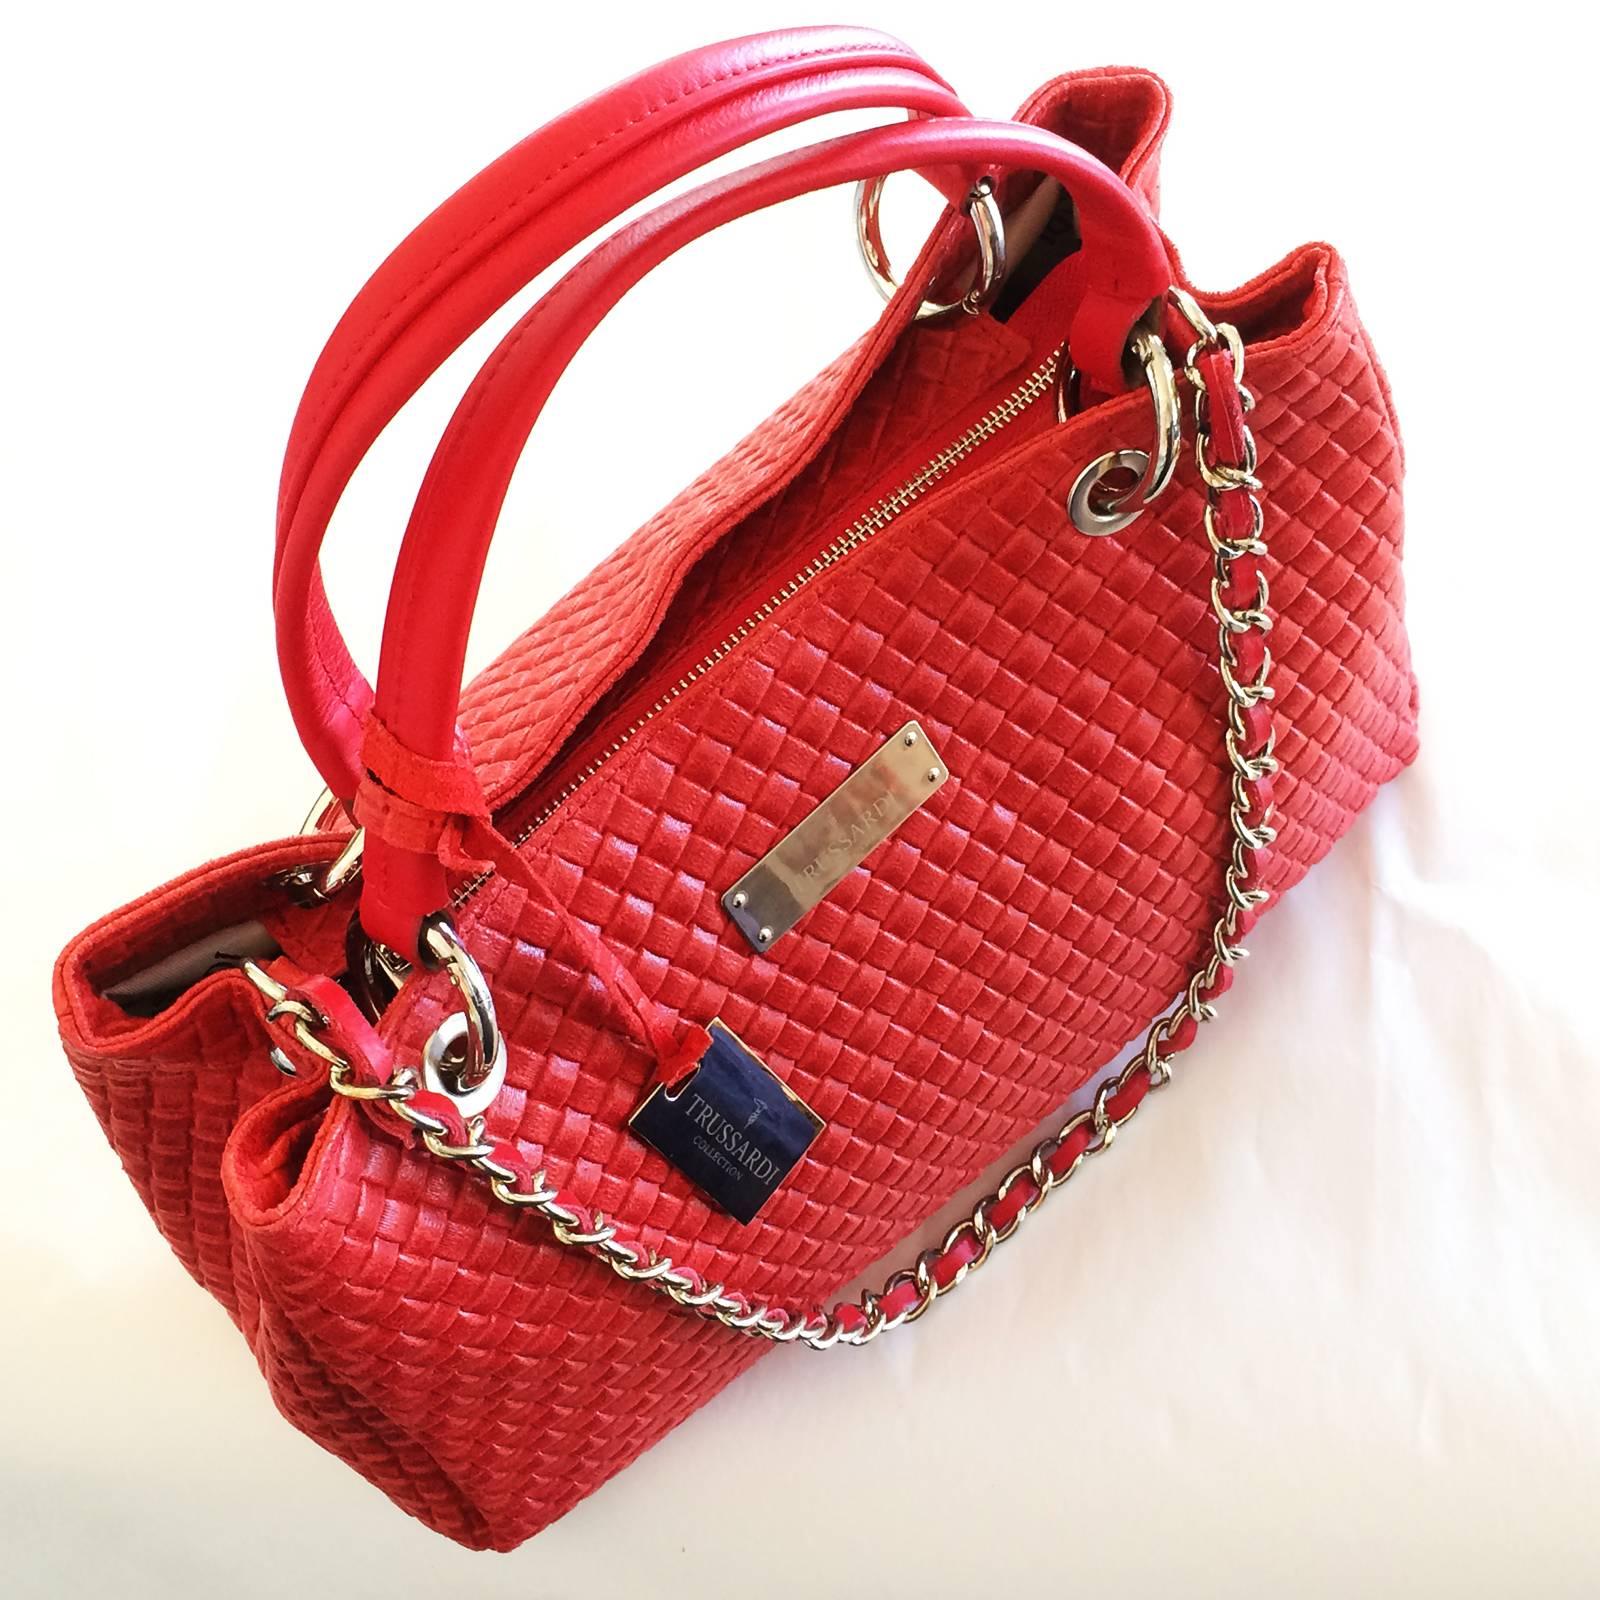 Wonderful  Handbag, a Vera Pelle’ Structured Design, for the Trussardi Collection, in Rosso Red. New, Old Stock in new condition and a versatile design with multiple Handle or Strap combinations. The shoulder strap can be left inside the bag if